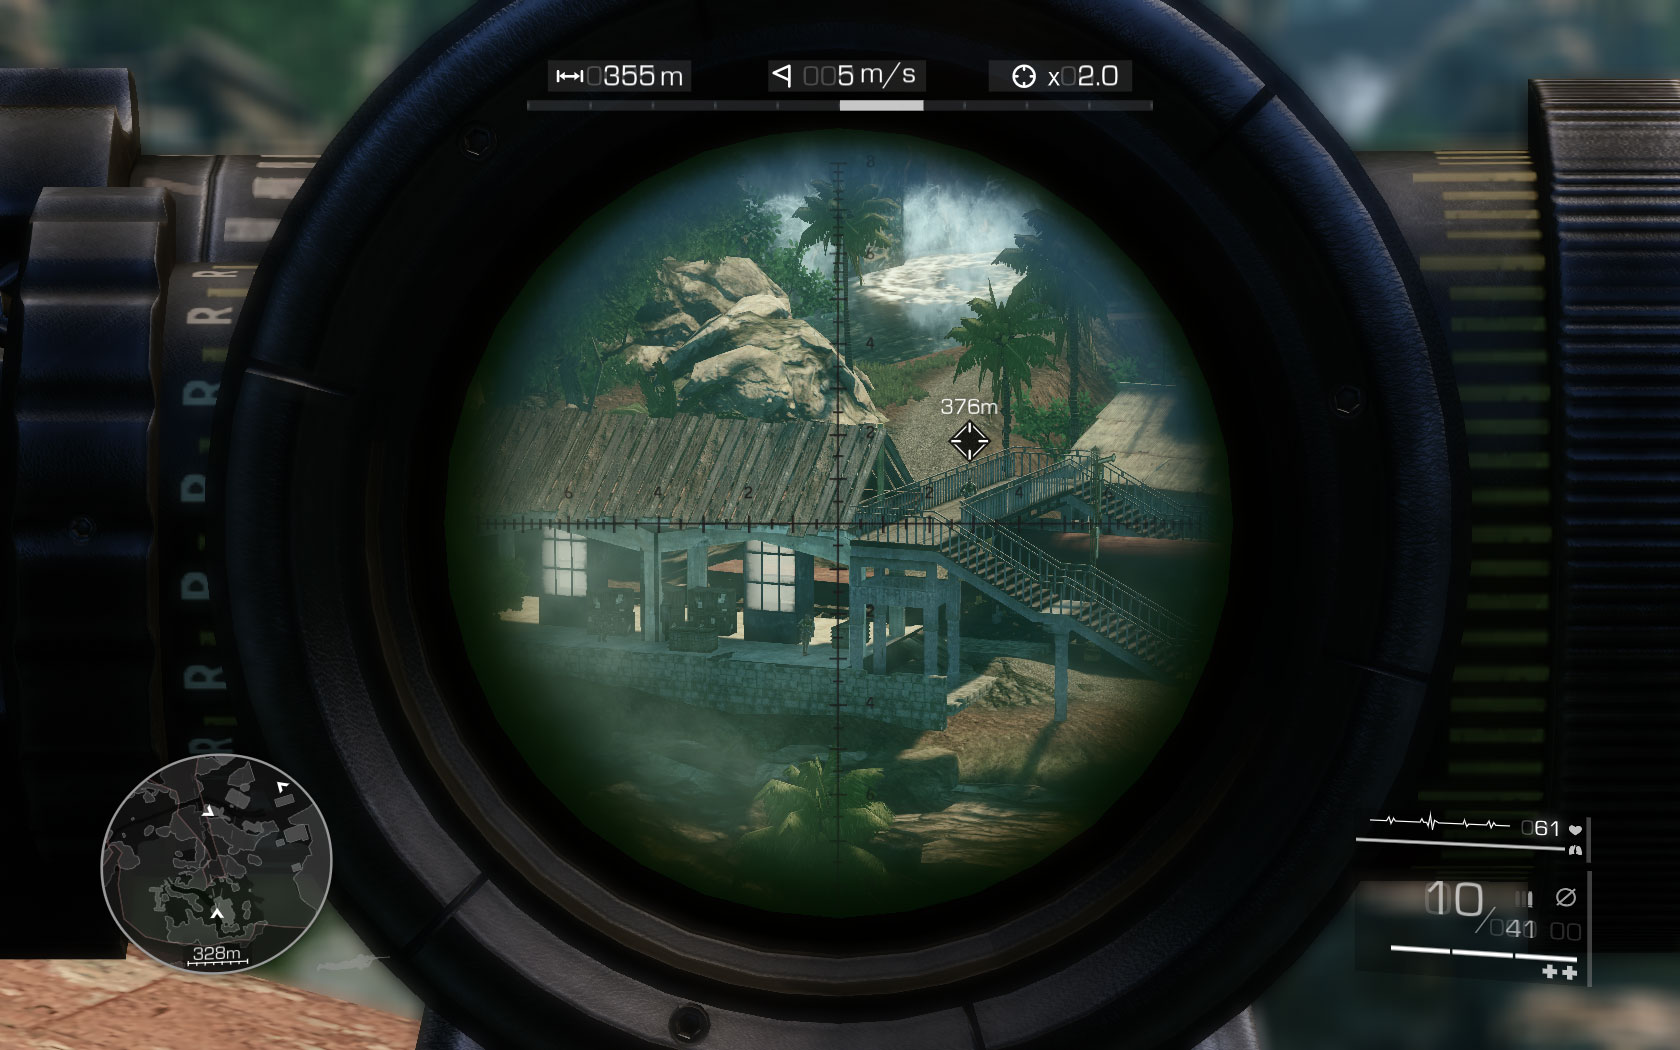 This time you will have to clear the area for Diaz - point your scope maximally to the left and you should see two enemies on the platform - Provide cover for the assault team - Act 1 - Communication Breakdown - Sniper: Ghost Warrior 2 - Game Guide and Walkthrough